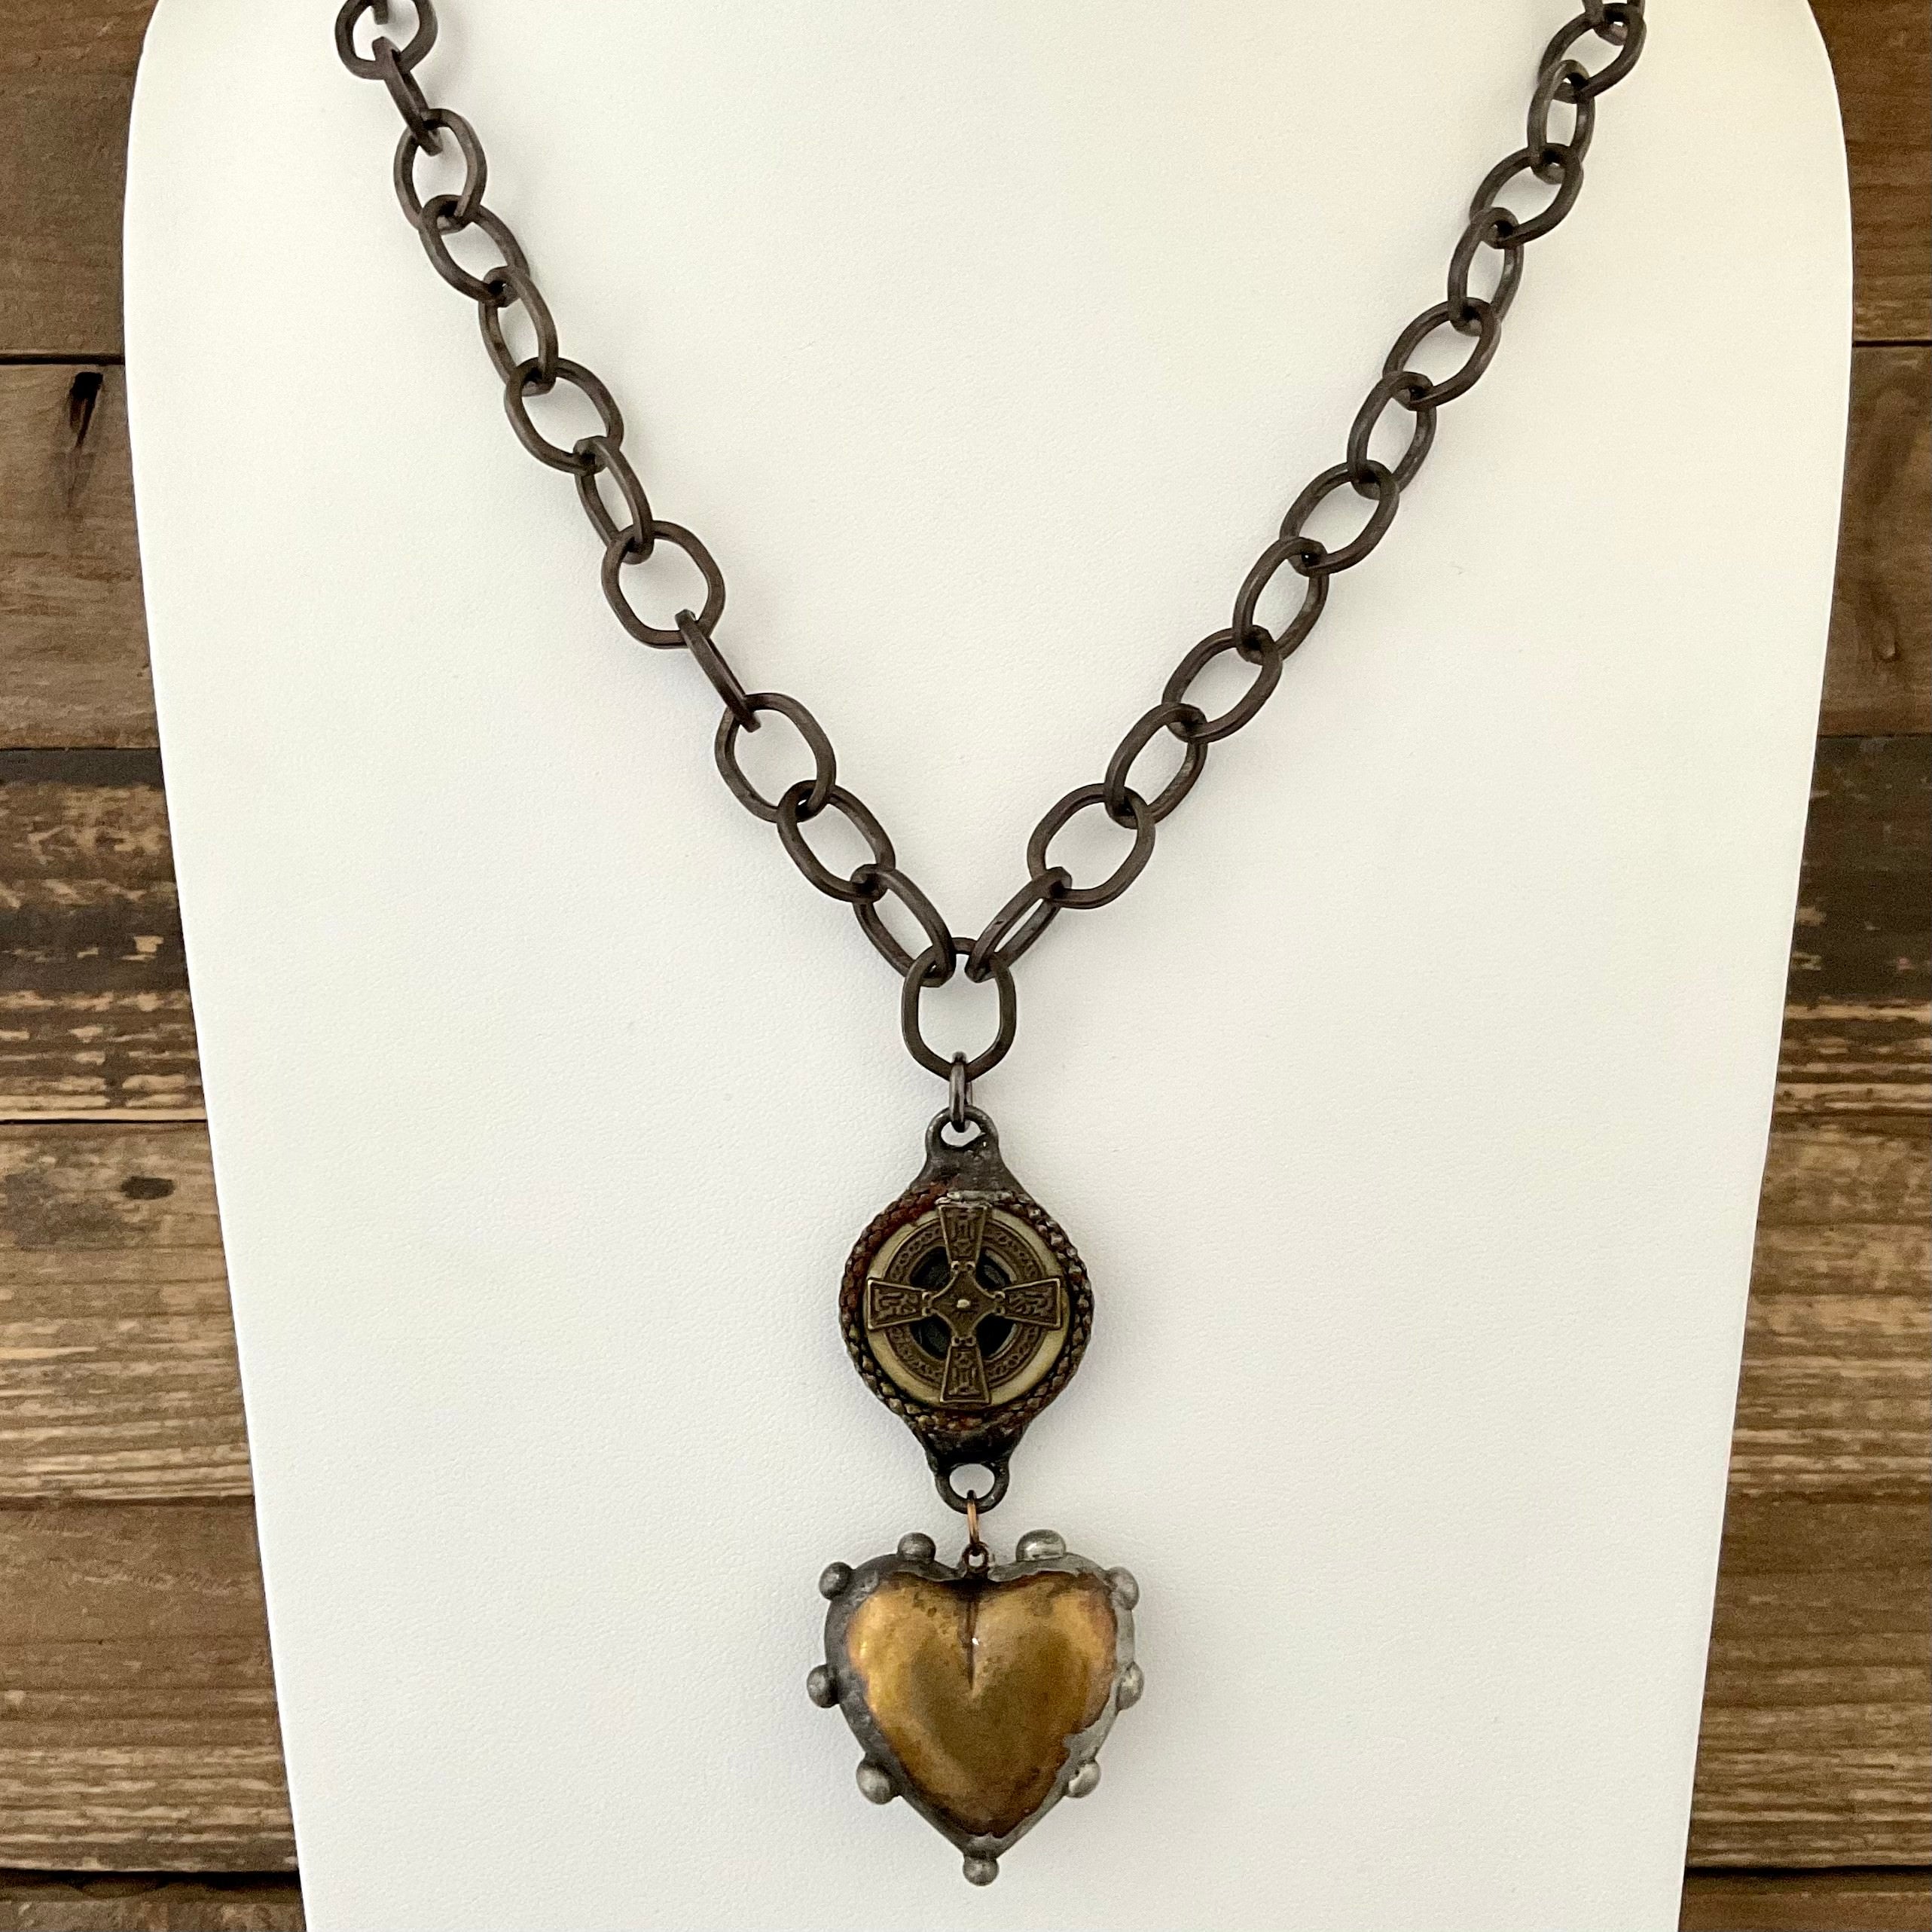 Vintage Chain with Connector & Soldered Heart Pendant 34"